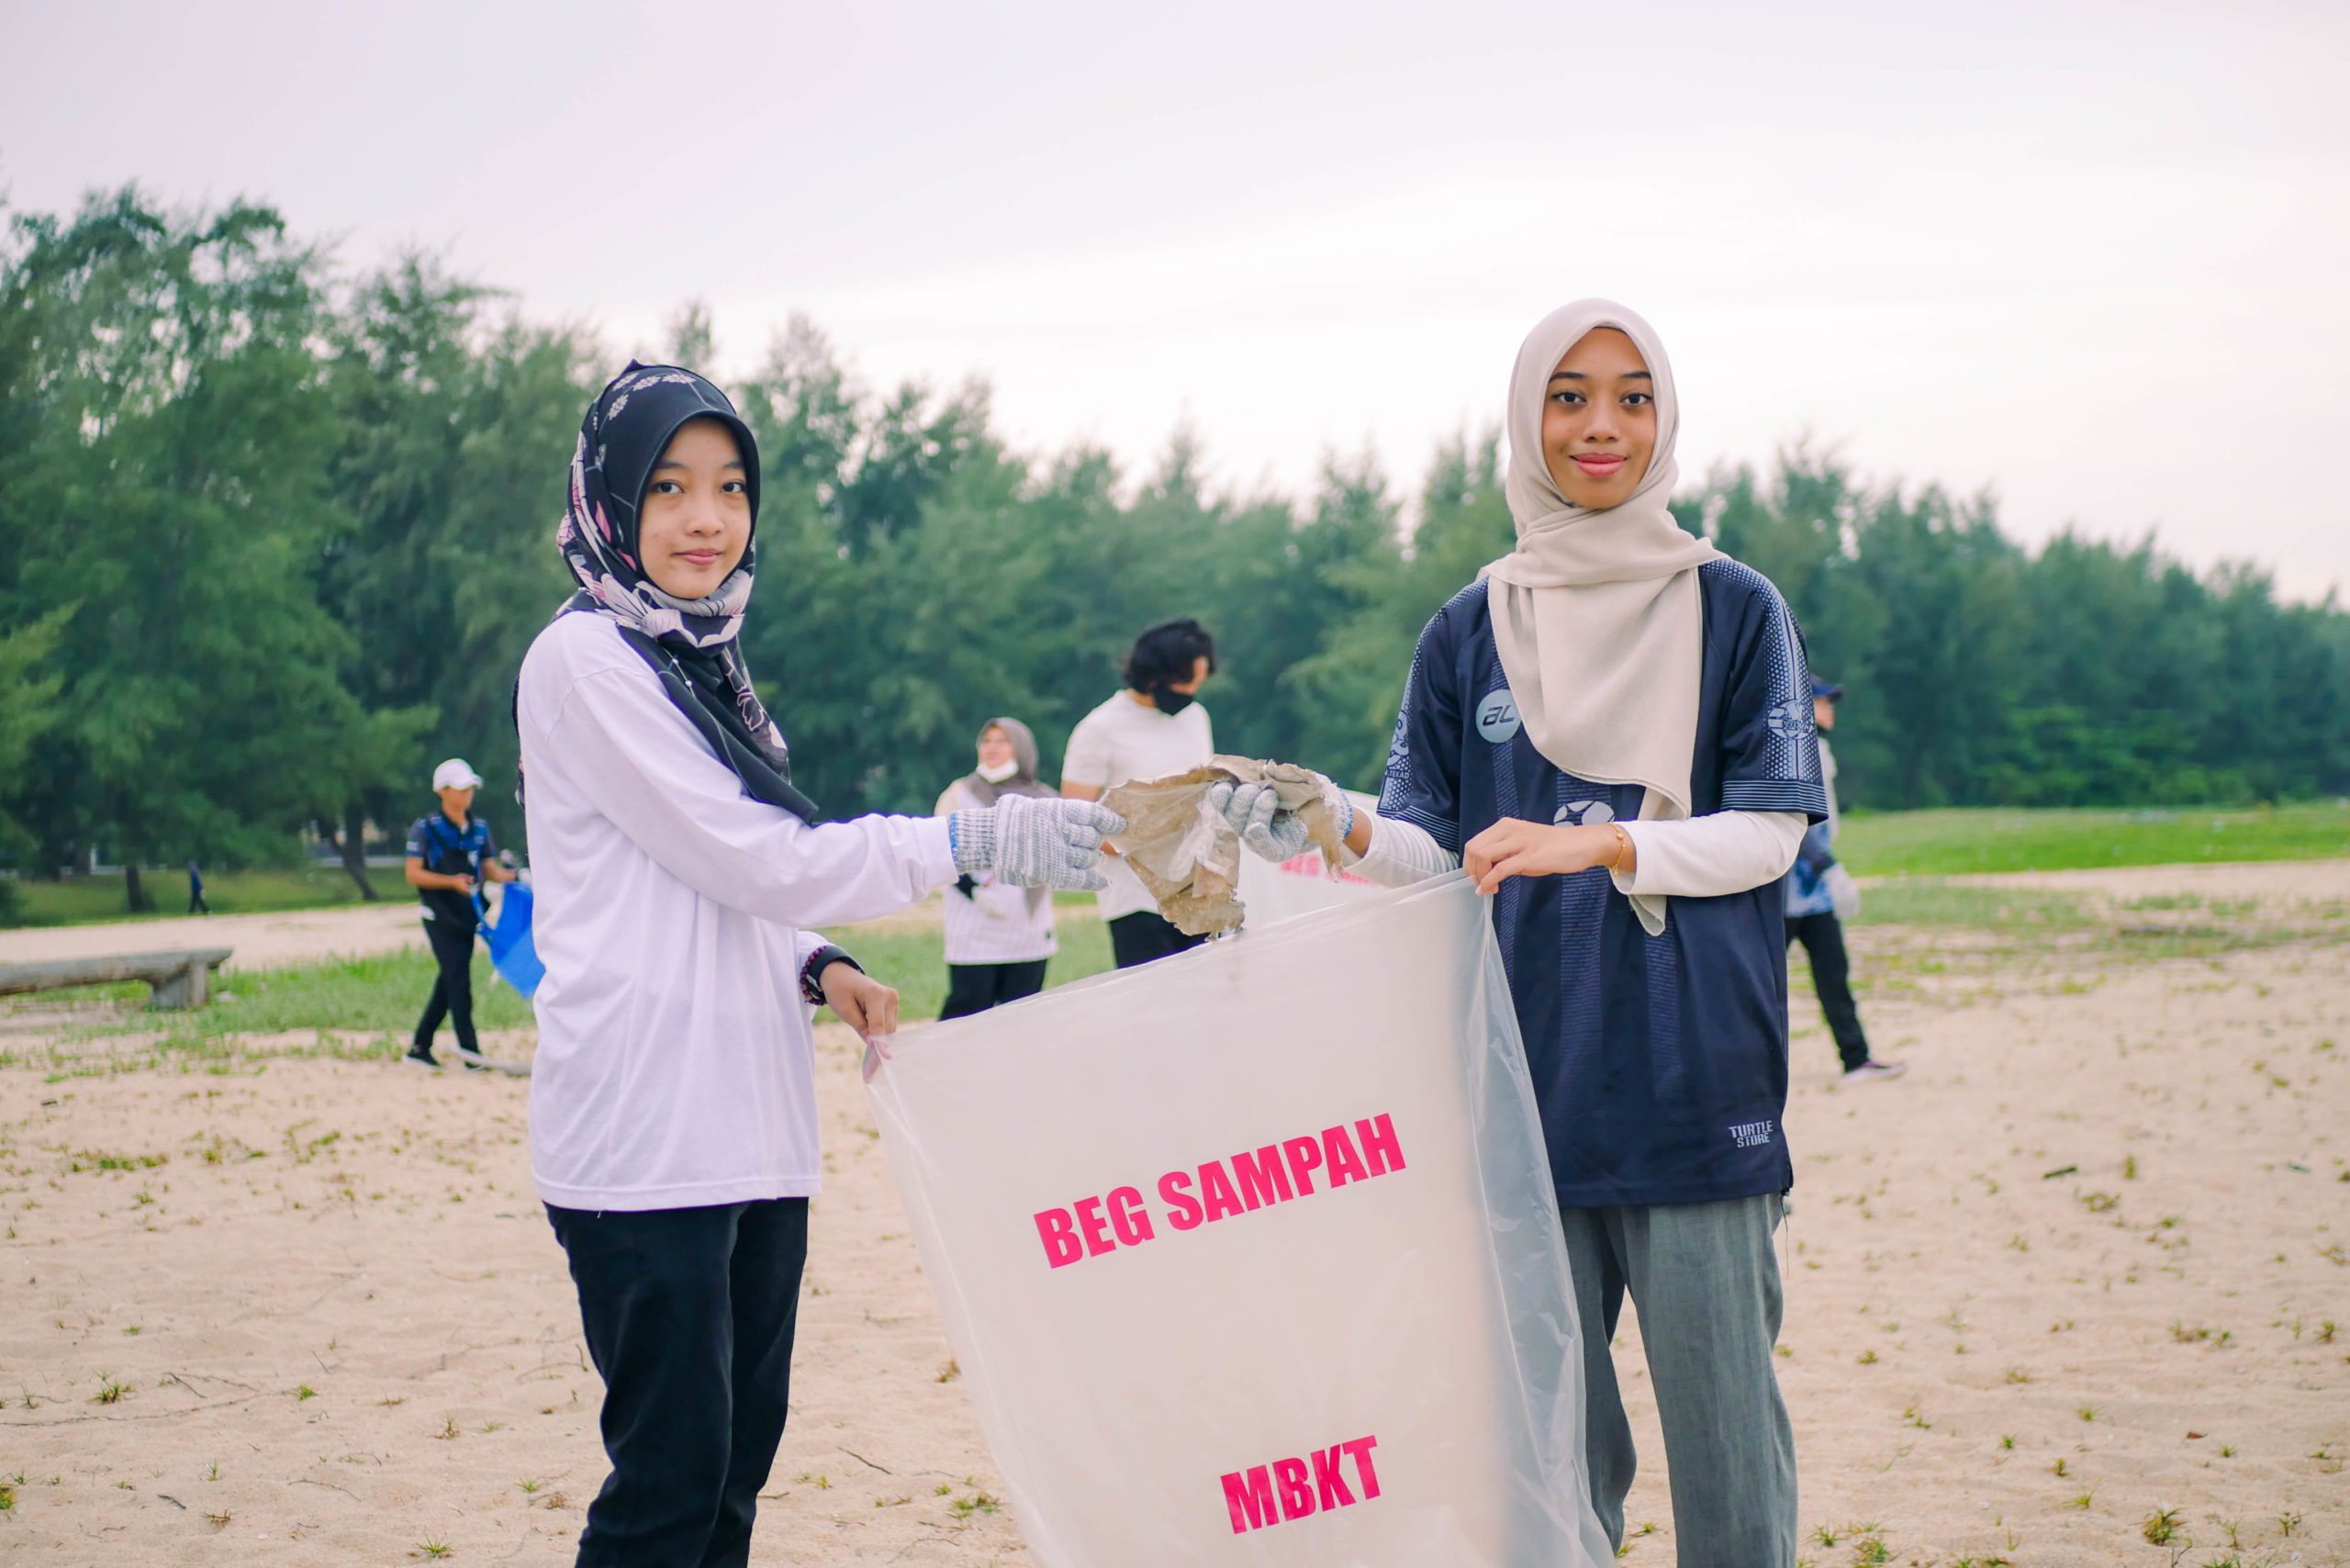 Take a look into uniqlo's adopt-a-beach & plastic upcycling livelihood project which addresses marine pollution